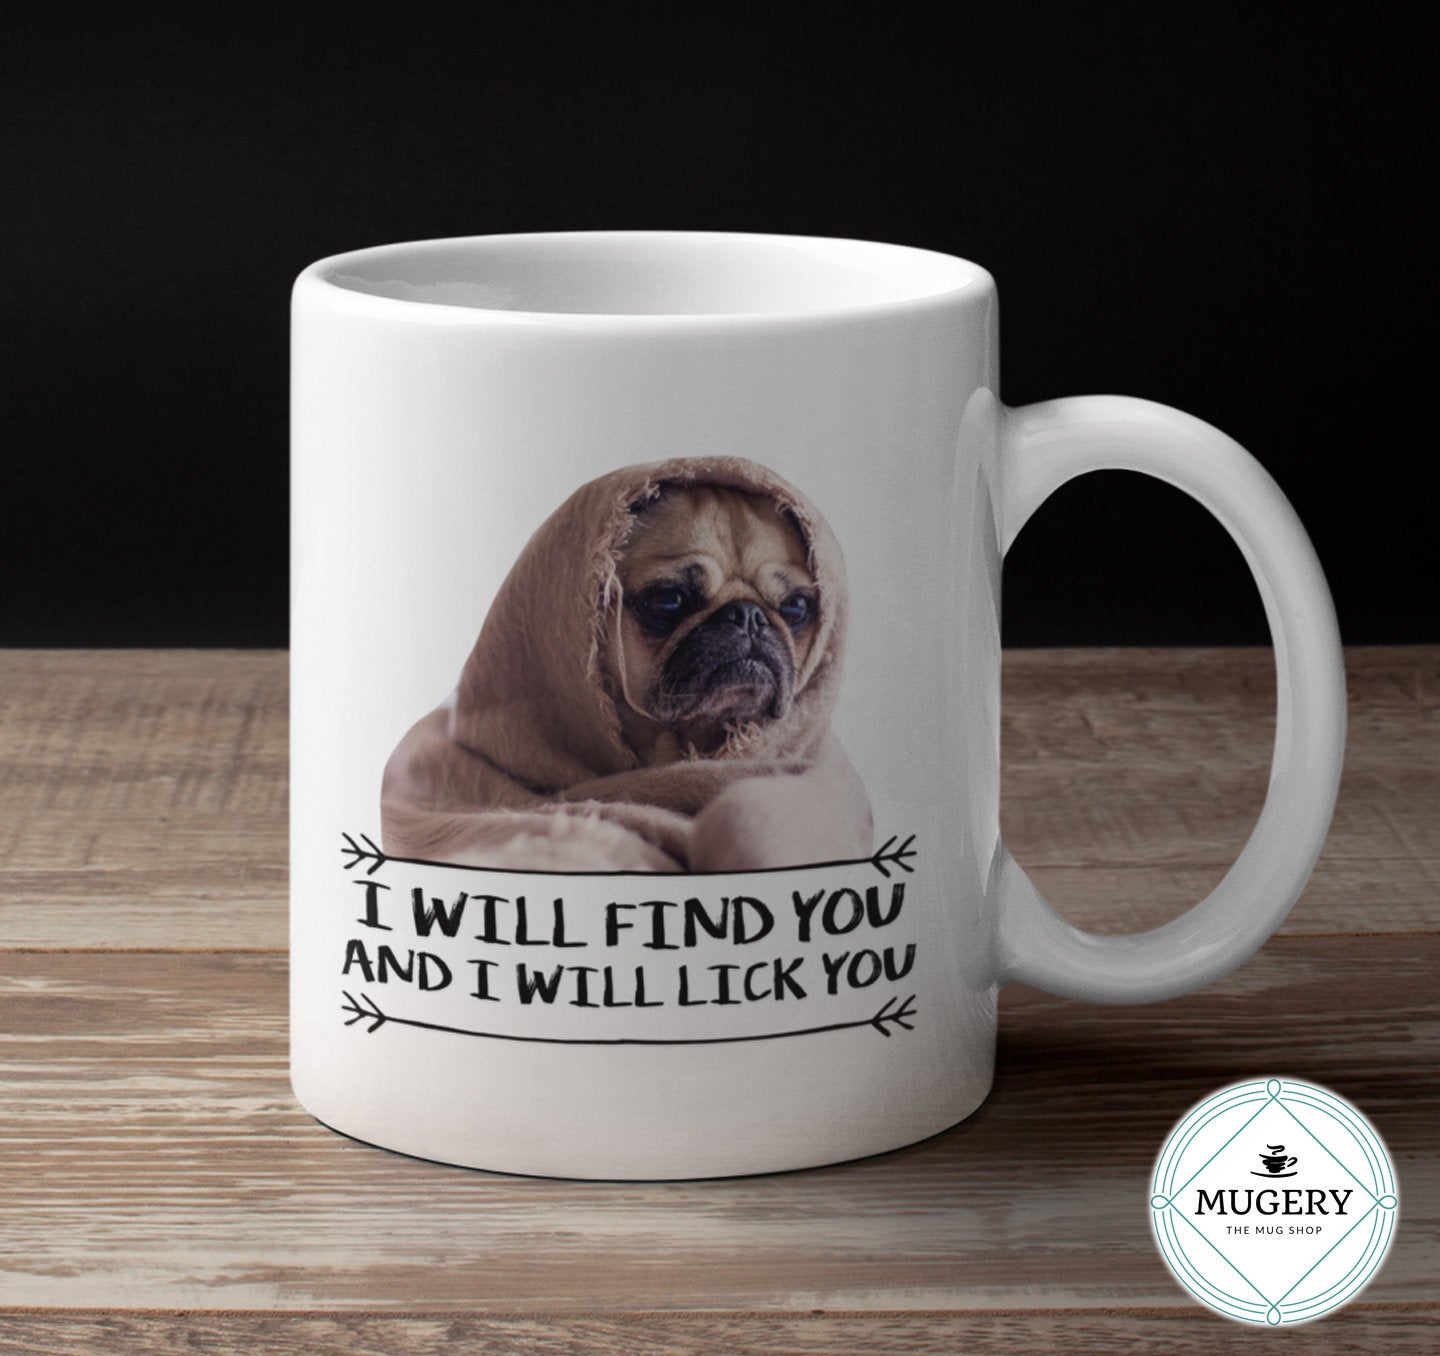 PUG Mug - I will Find you and I will Lick You